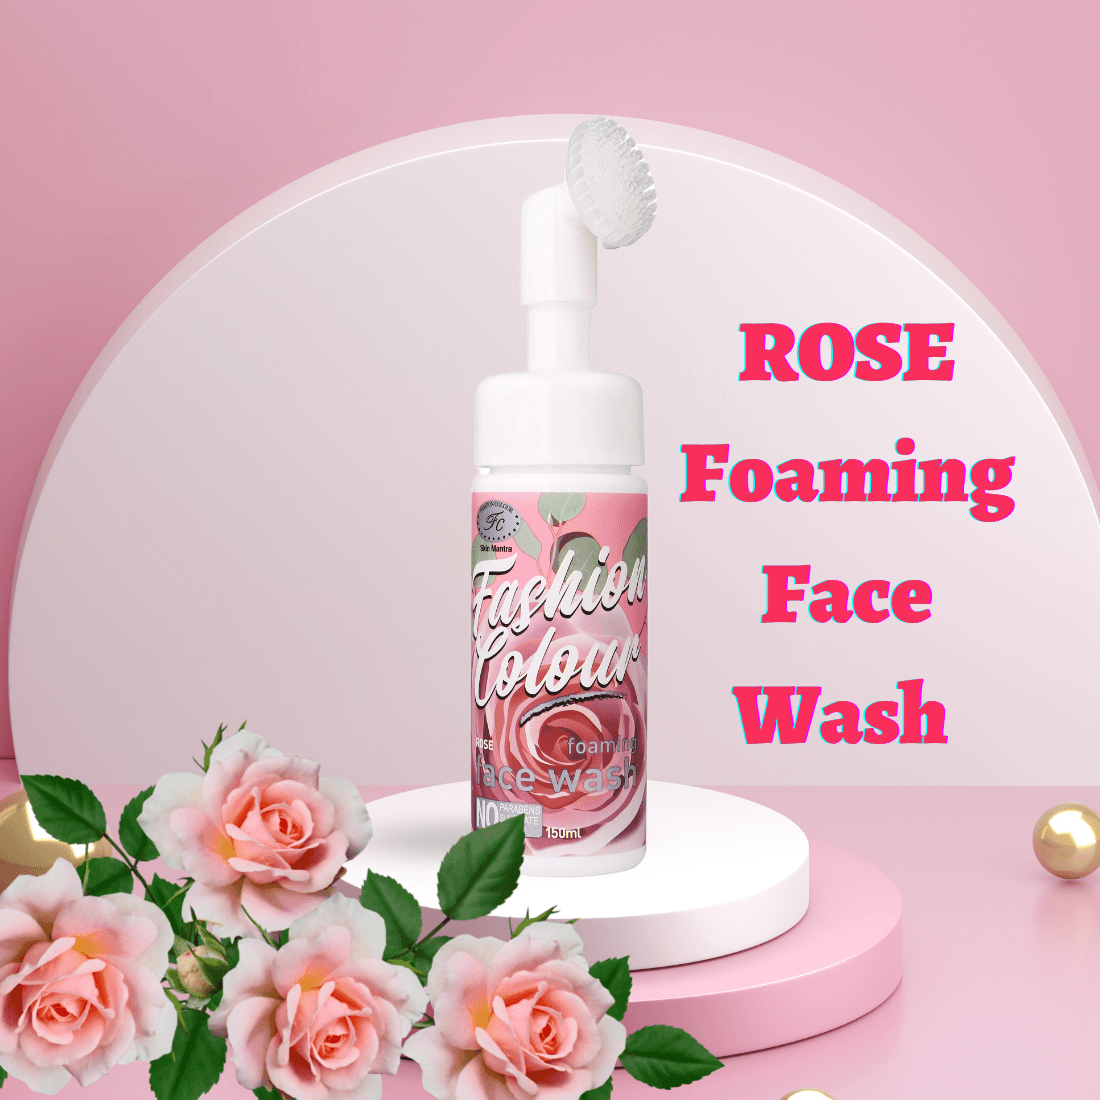 ROSE Foaming Face Wash With Built in Face Brush For Deep Cleansing and Healthy Skin 150mlfoaming face wash facial foam tea tree foaming face wash fash foam face wash clean & clear foaming face wash face shop face wash rose foaming face wash rose face wash face wash best face wash best face wash for acne best facial cleanser fair and lovely face wash natural face wash best face wash for combination skin skin care face wash foaming facial cleanser organic face wash